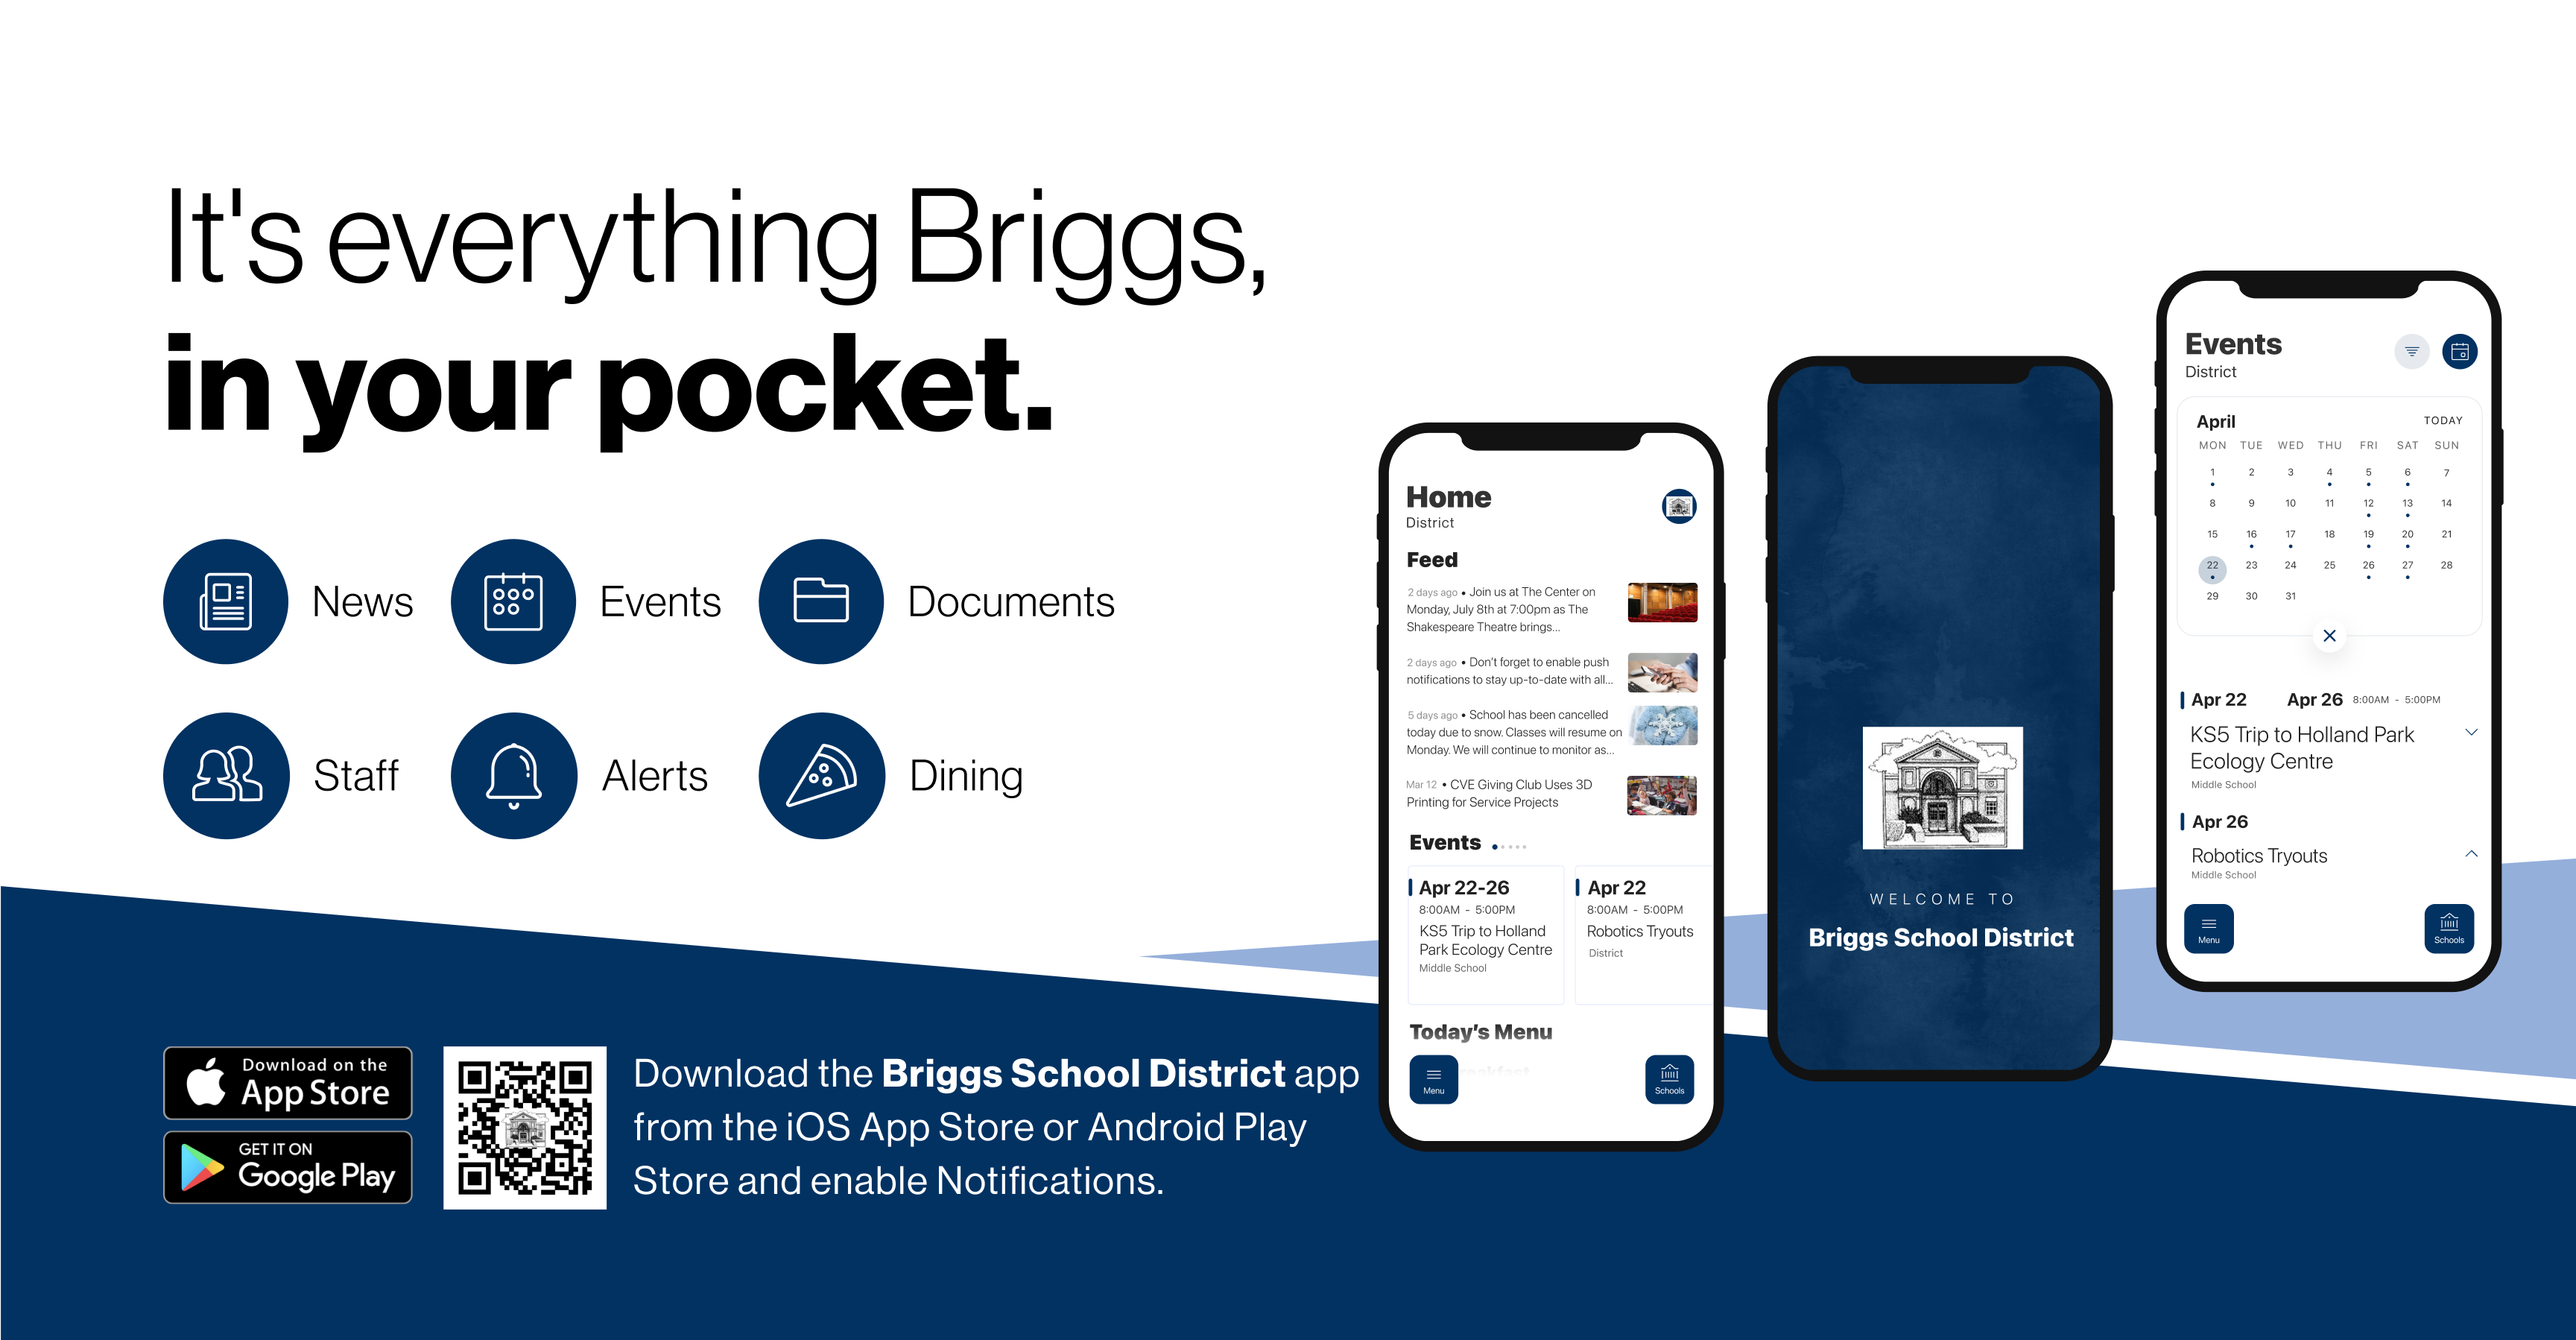 It's everything briggs in your pocket 